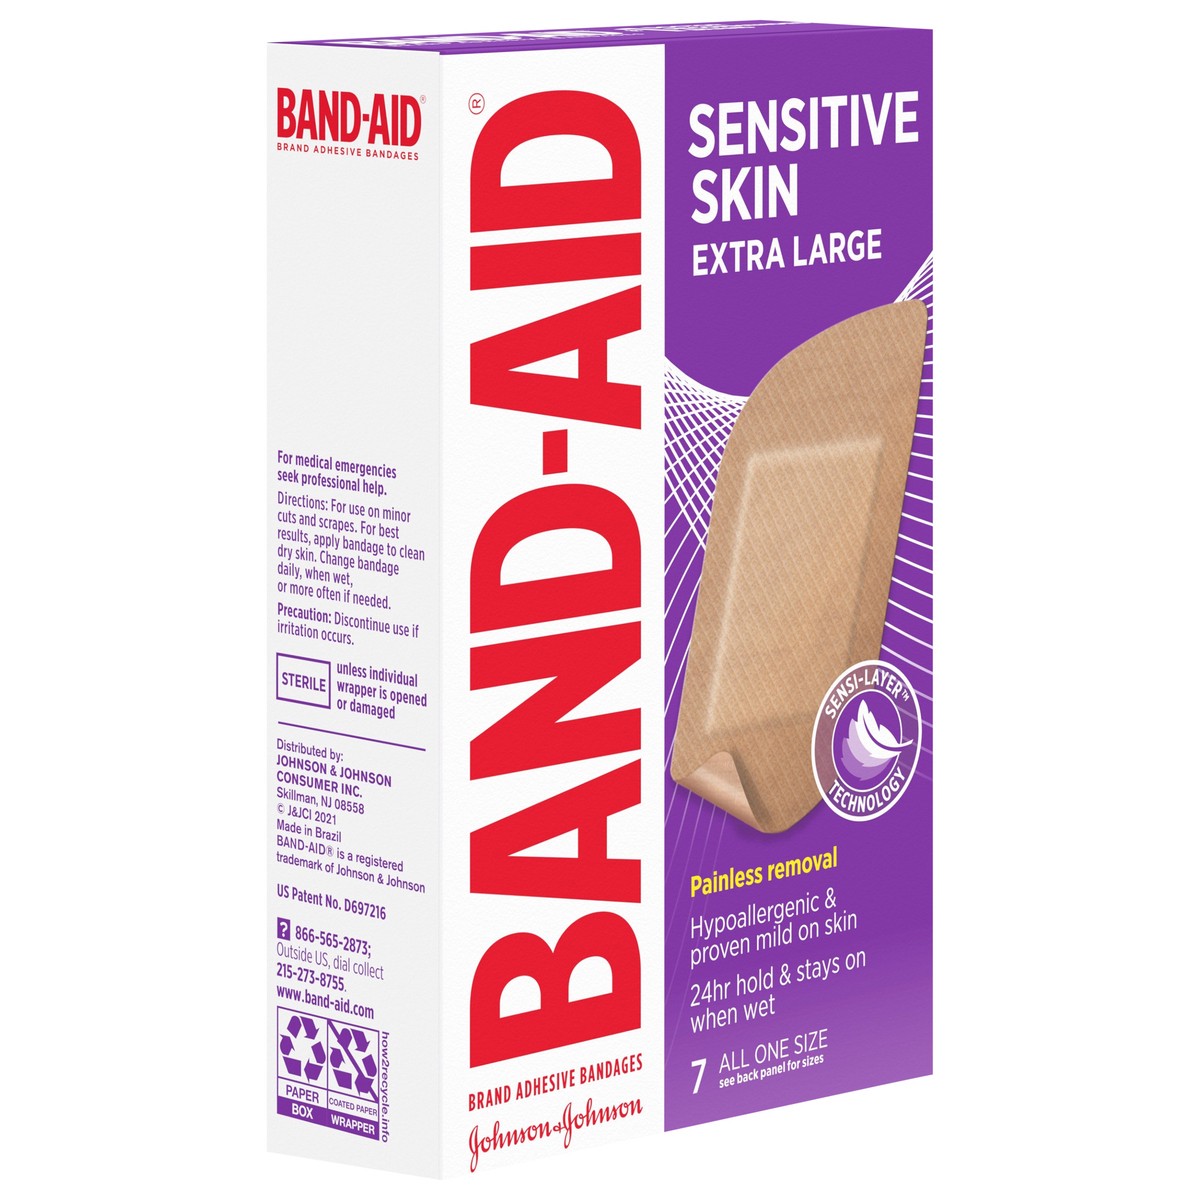 slide 2 of 8, BAND-AID Adhesive Bandages for Sensitive Skin, Hypoallergenic Bandages with Painless Removal, Stays on When Wet and Suitable for Eczema Prone Skin, Sterile, Extra Large Size, 7 ct, 7 ct